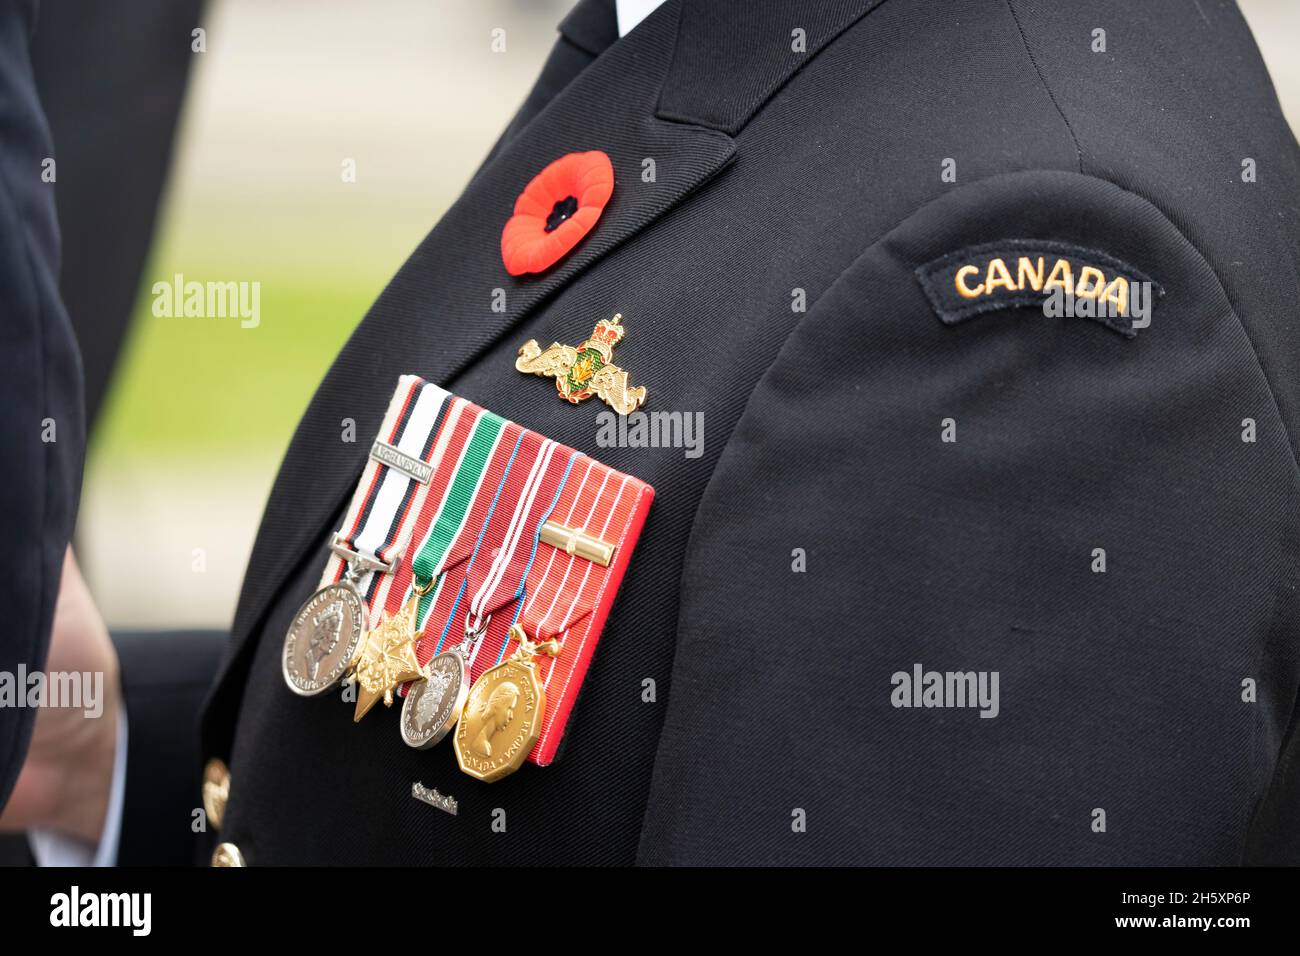 Remembrance Day Canada, Poppy, Medals, Toronto, 2021 Stock Photo